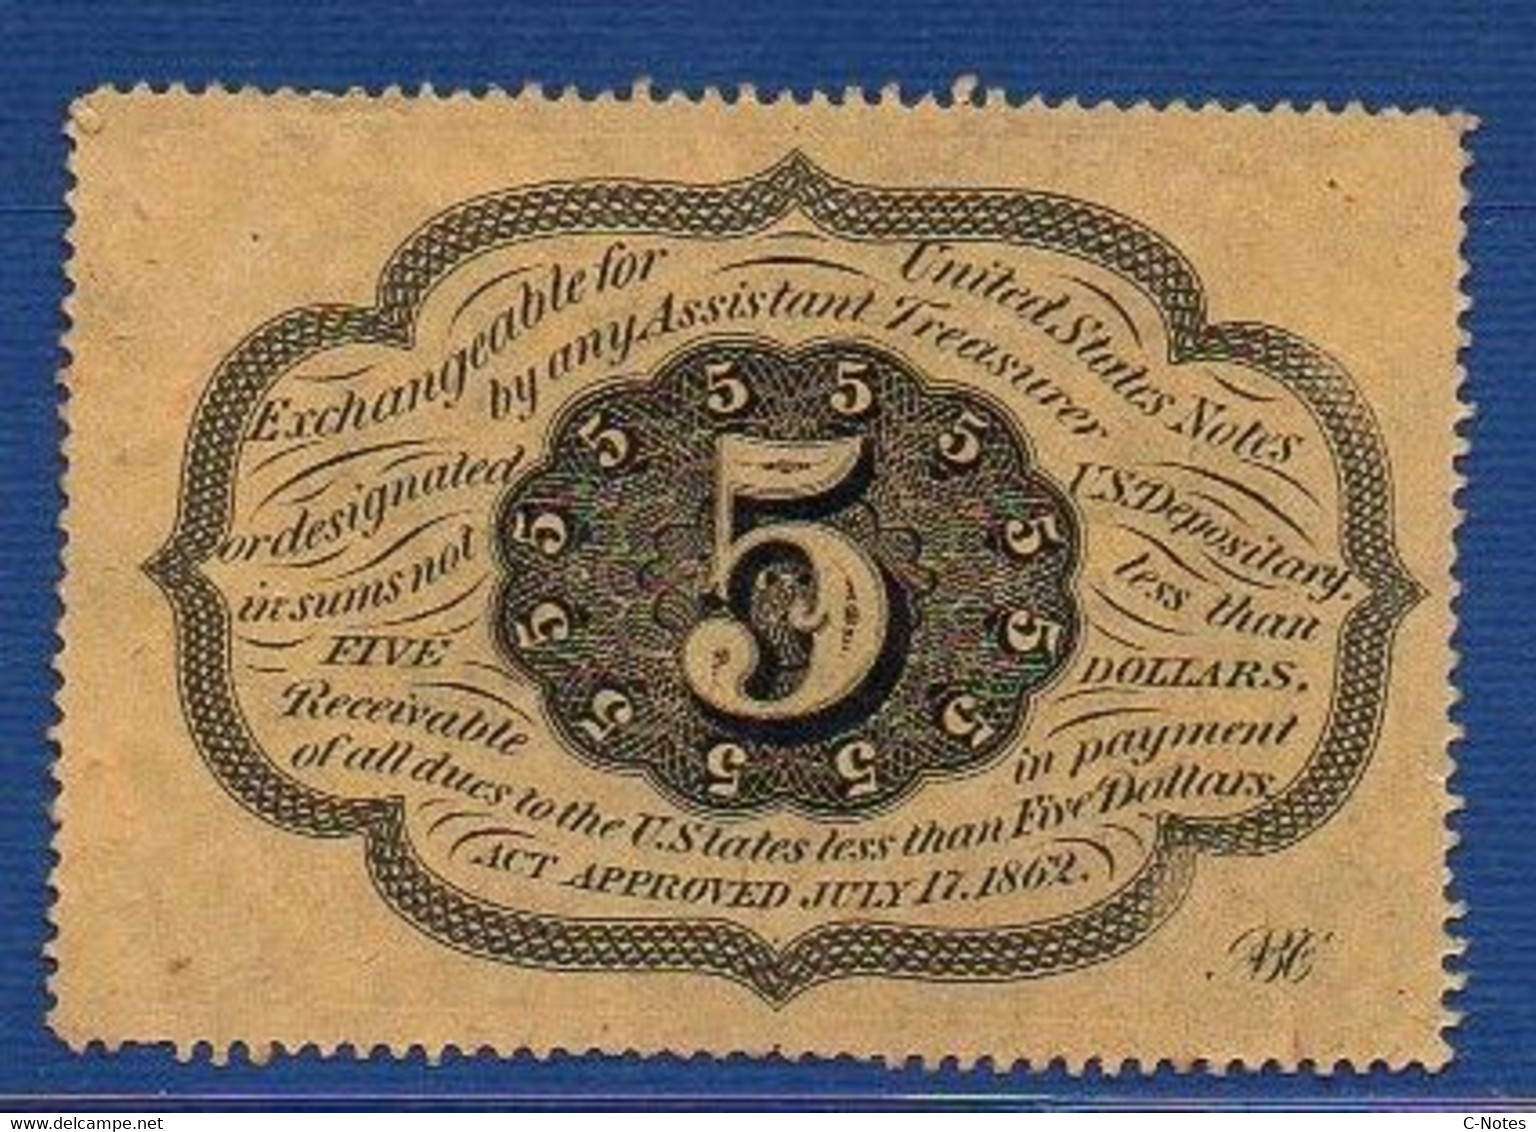 UNITED STATES OF AMERICA - P. 97a – 5 Cents 1862 AUNC, No Serial Number - 1862 : 1° Issue